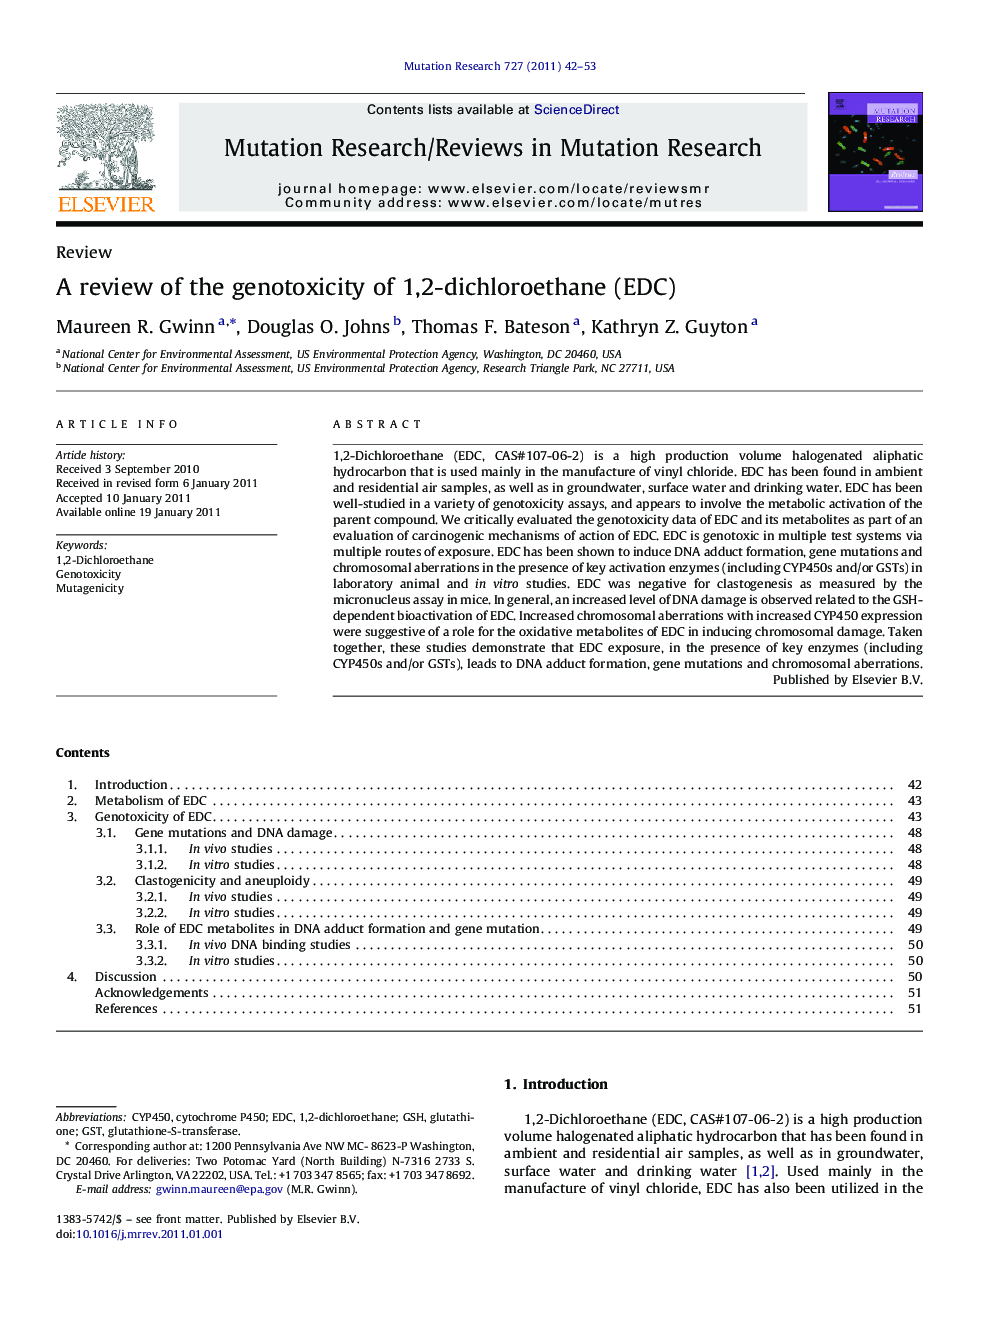 A review of the genotoxicity of 1,2-dichloroethane (EDC)